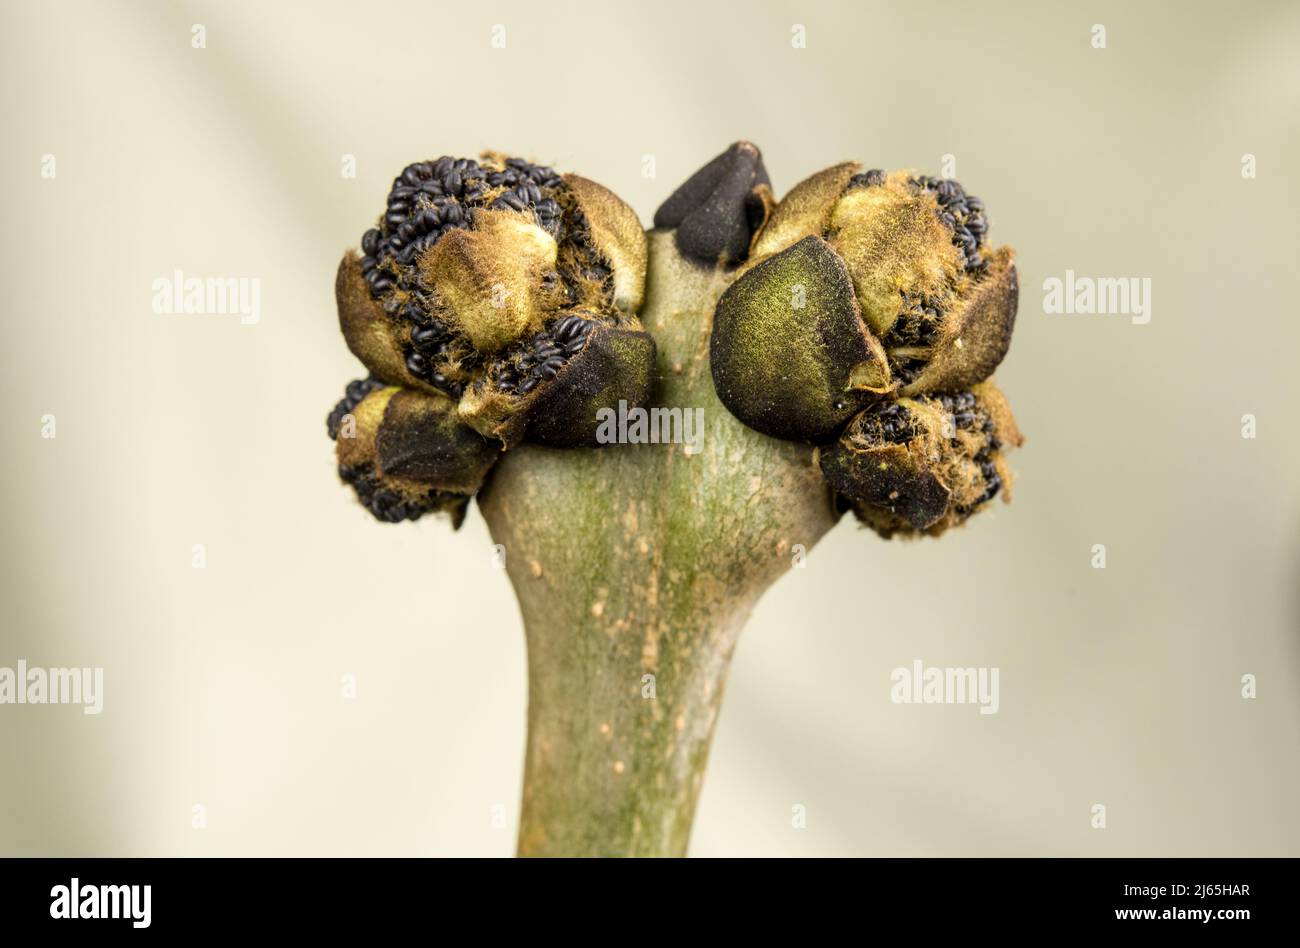 Flower buds of Fraxinus excelsior or European ash Stock Photo